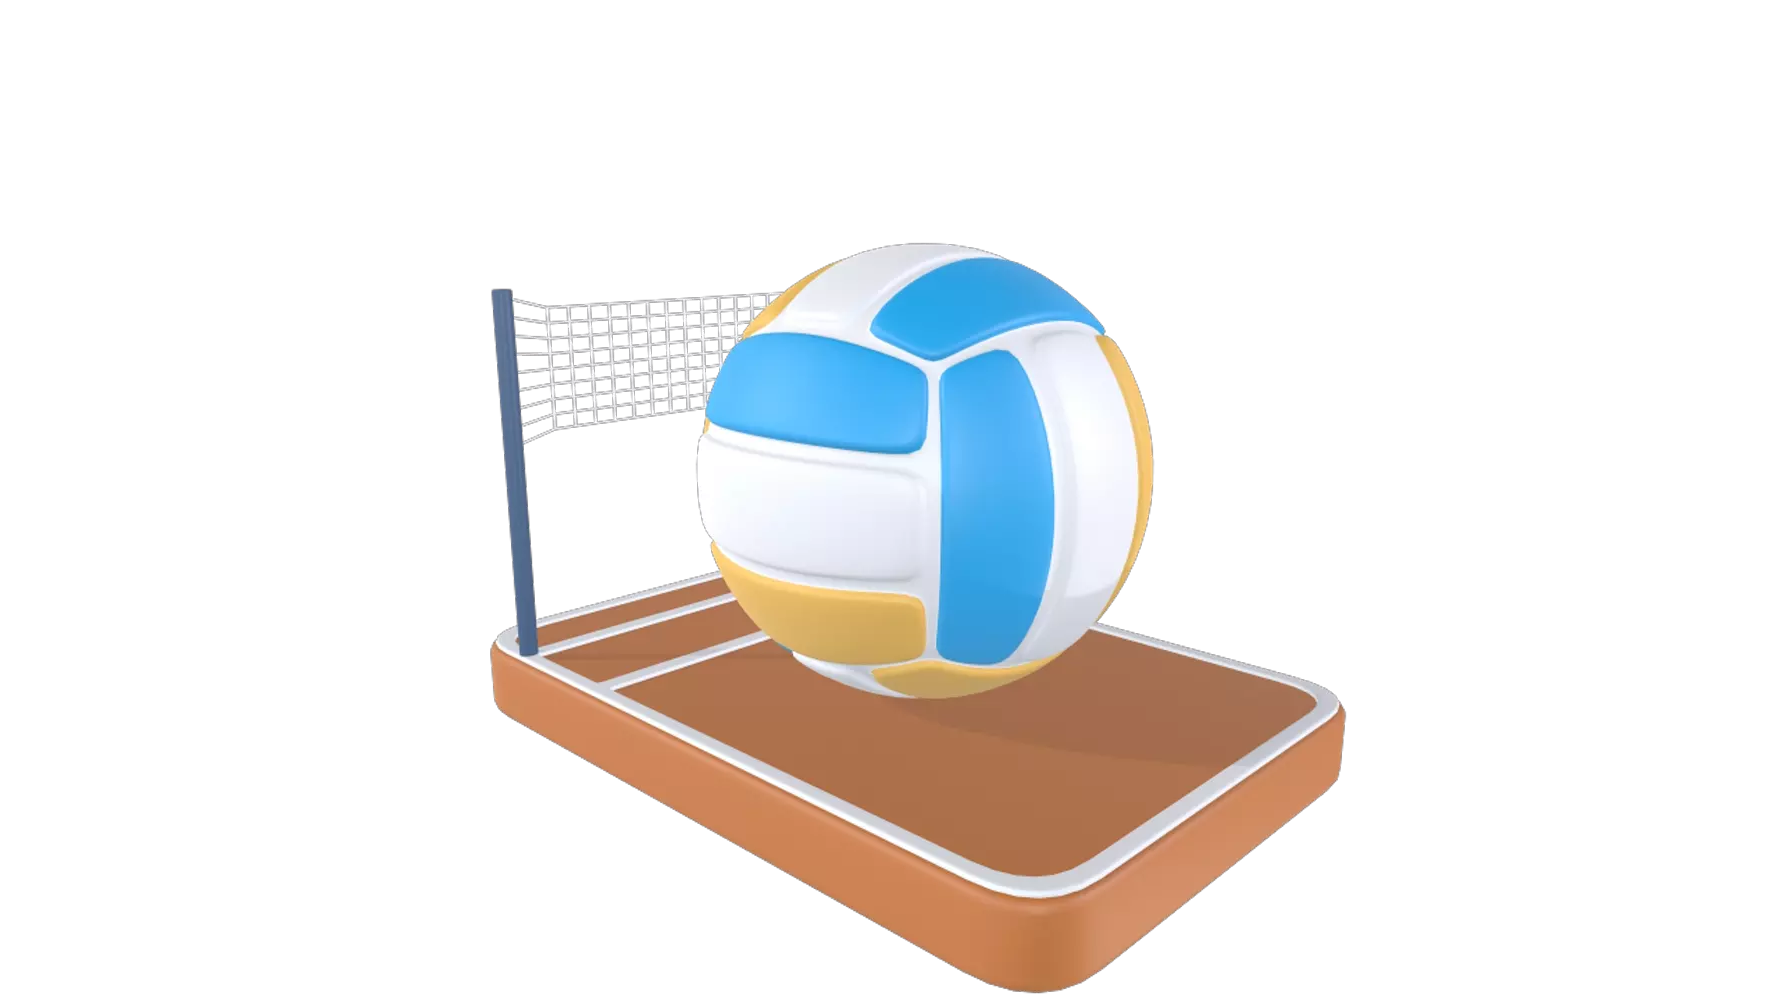 Volleyball 3D Graphic